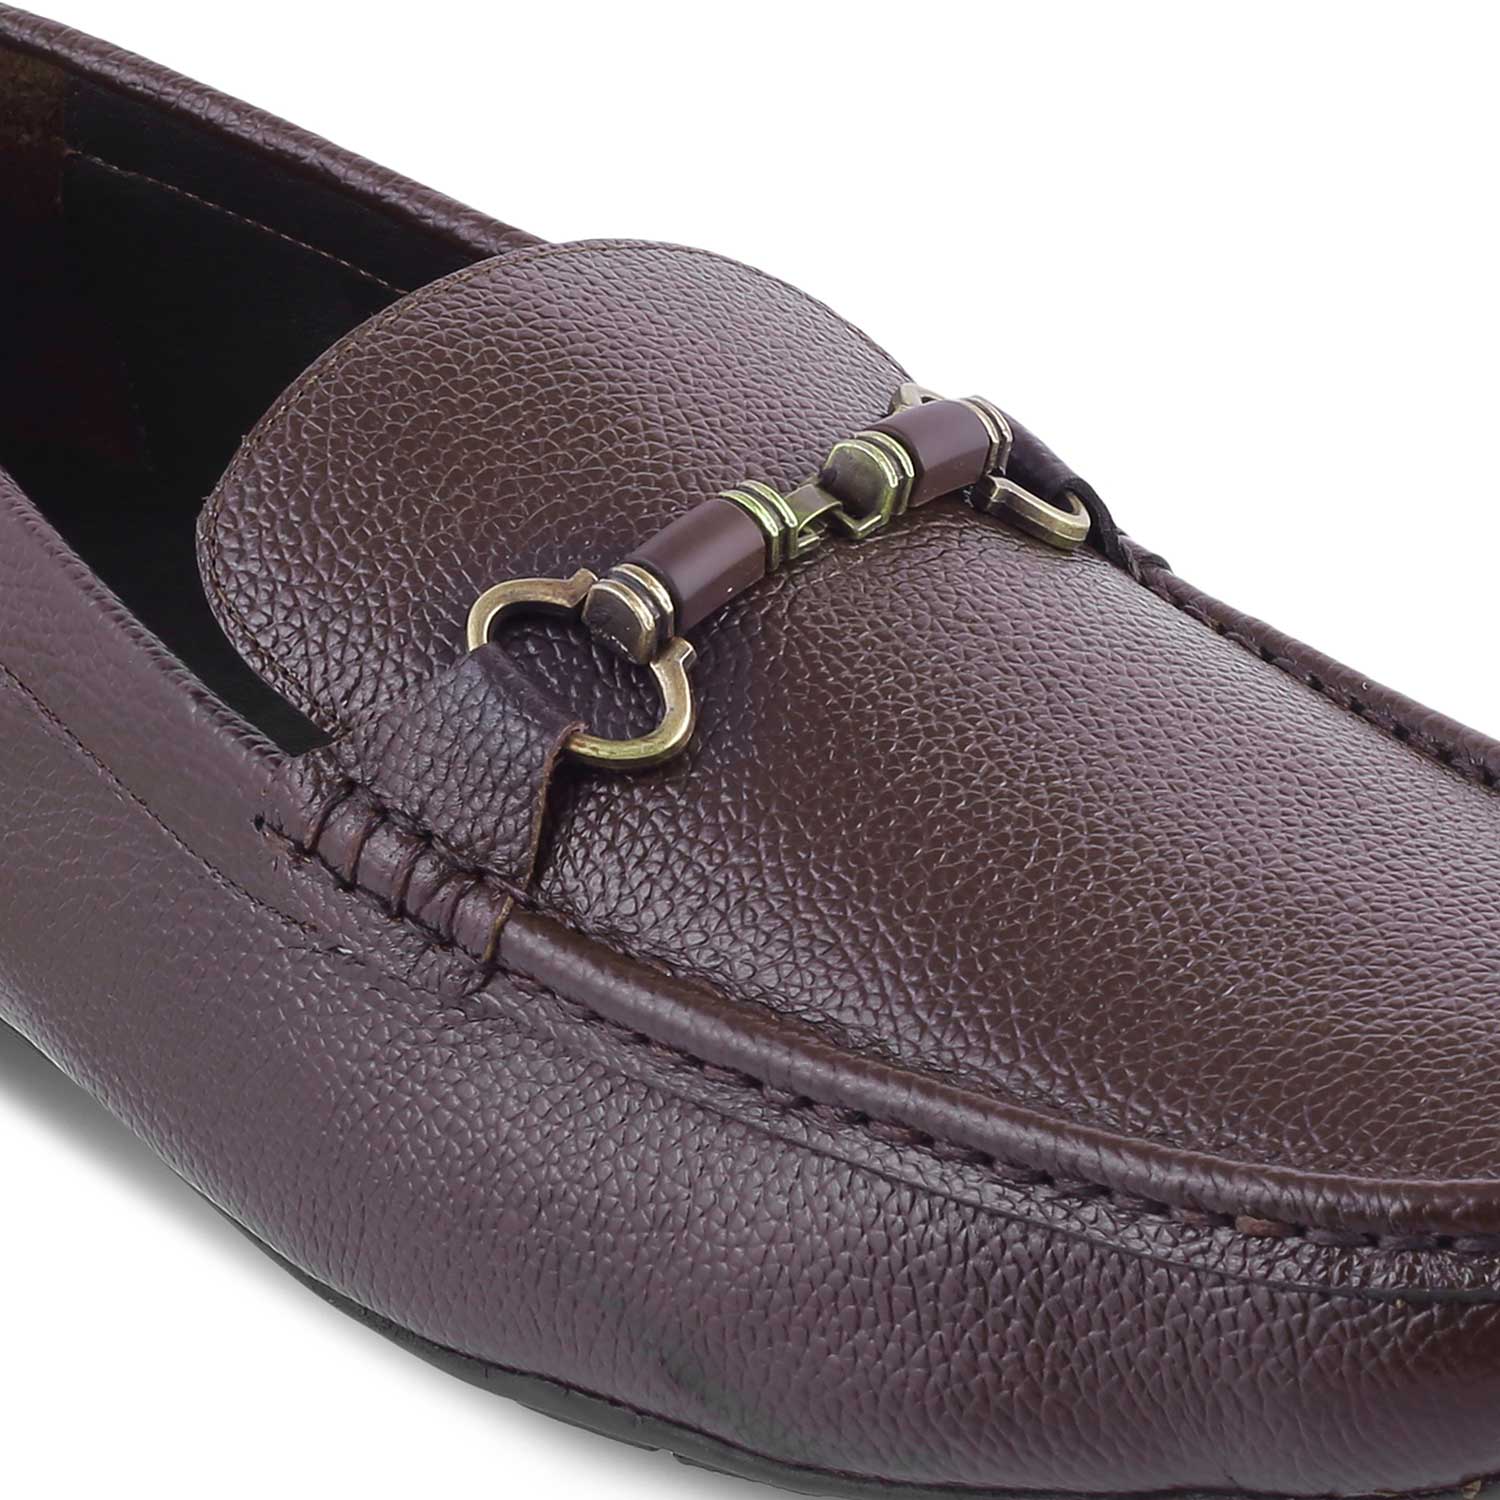 The Robuk Brown Men's Leather Driving Loafers Tresmode